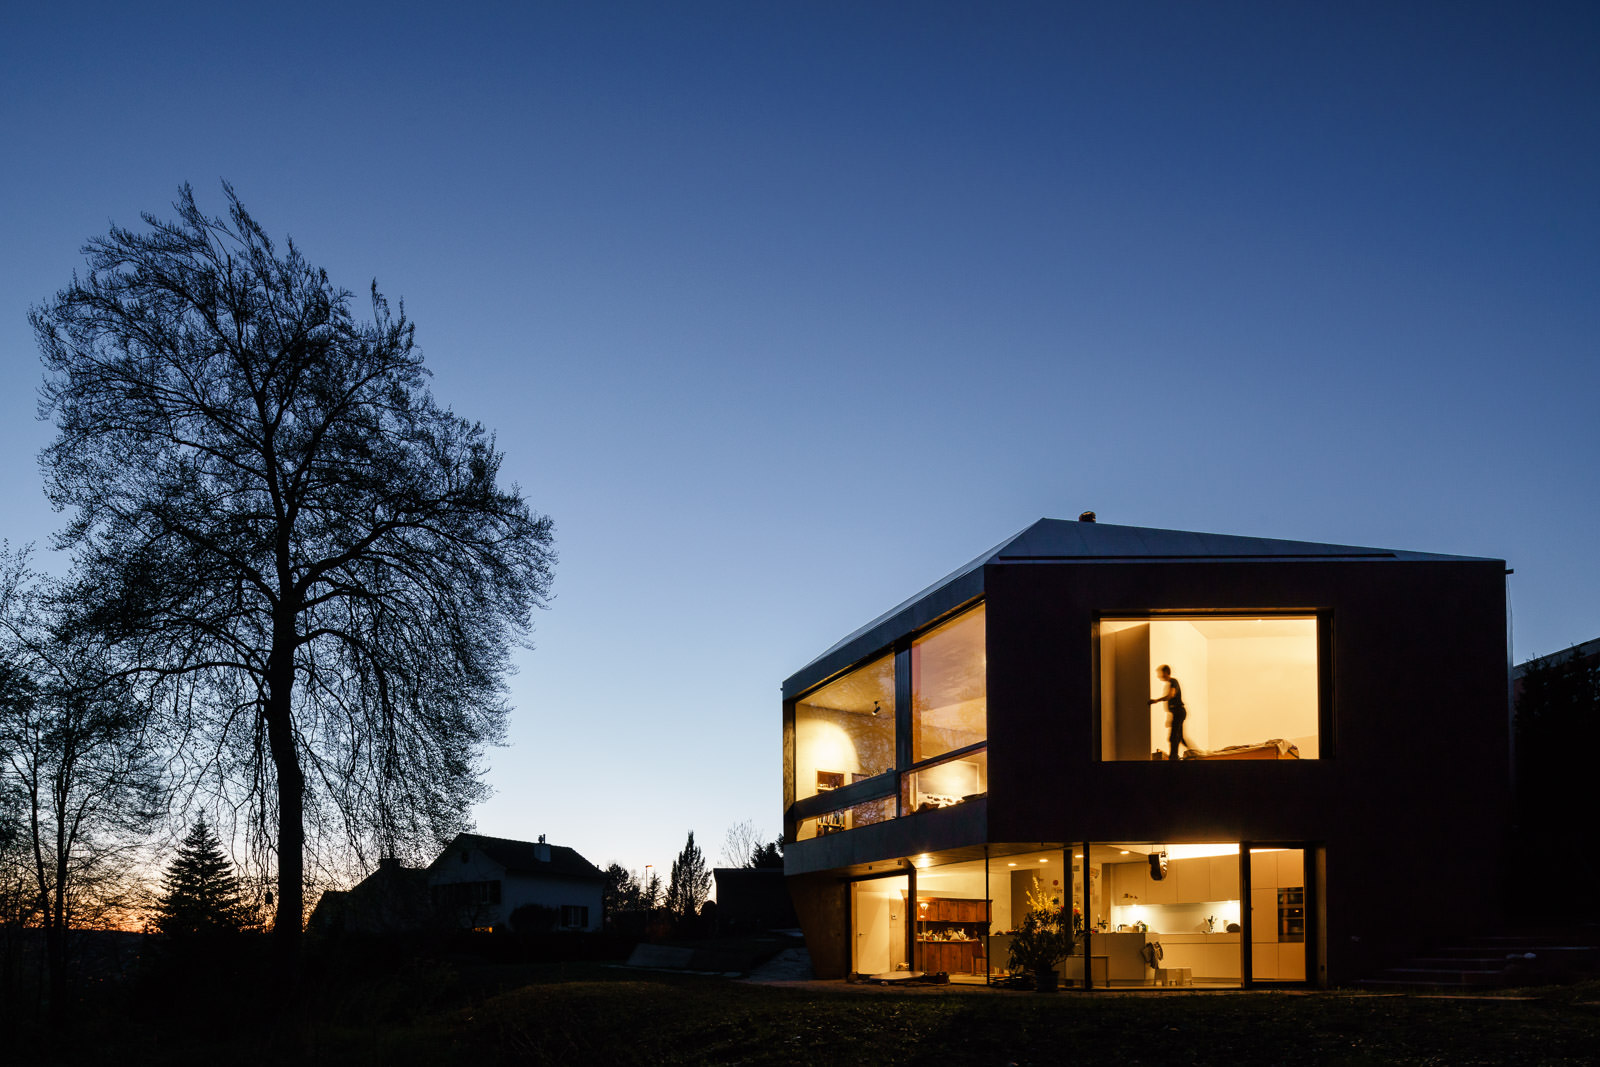 Casa Forest, blue hour photo - Architectural Photography Basel